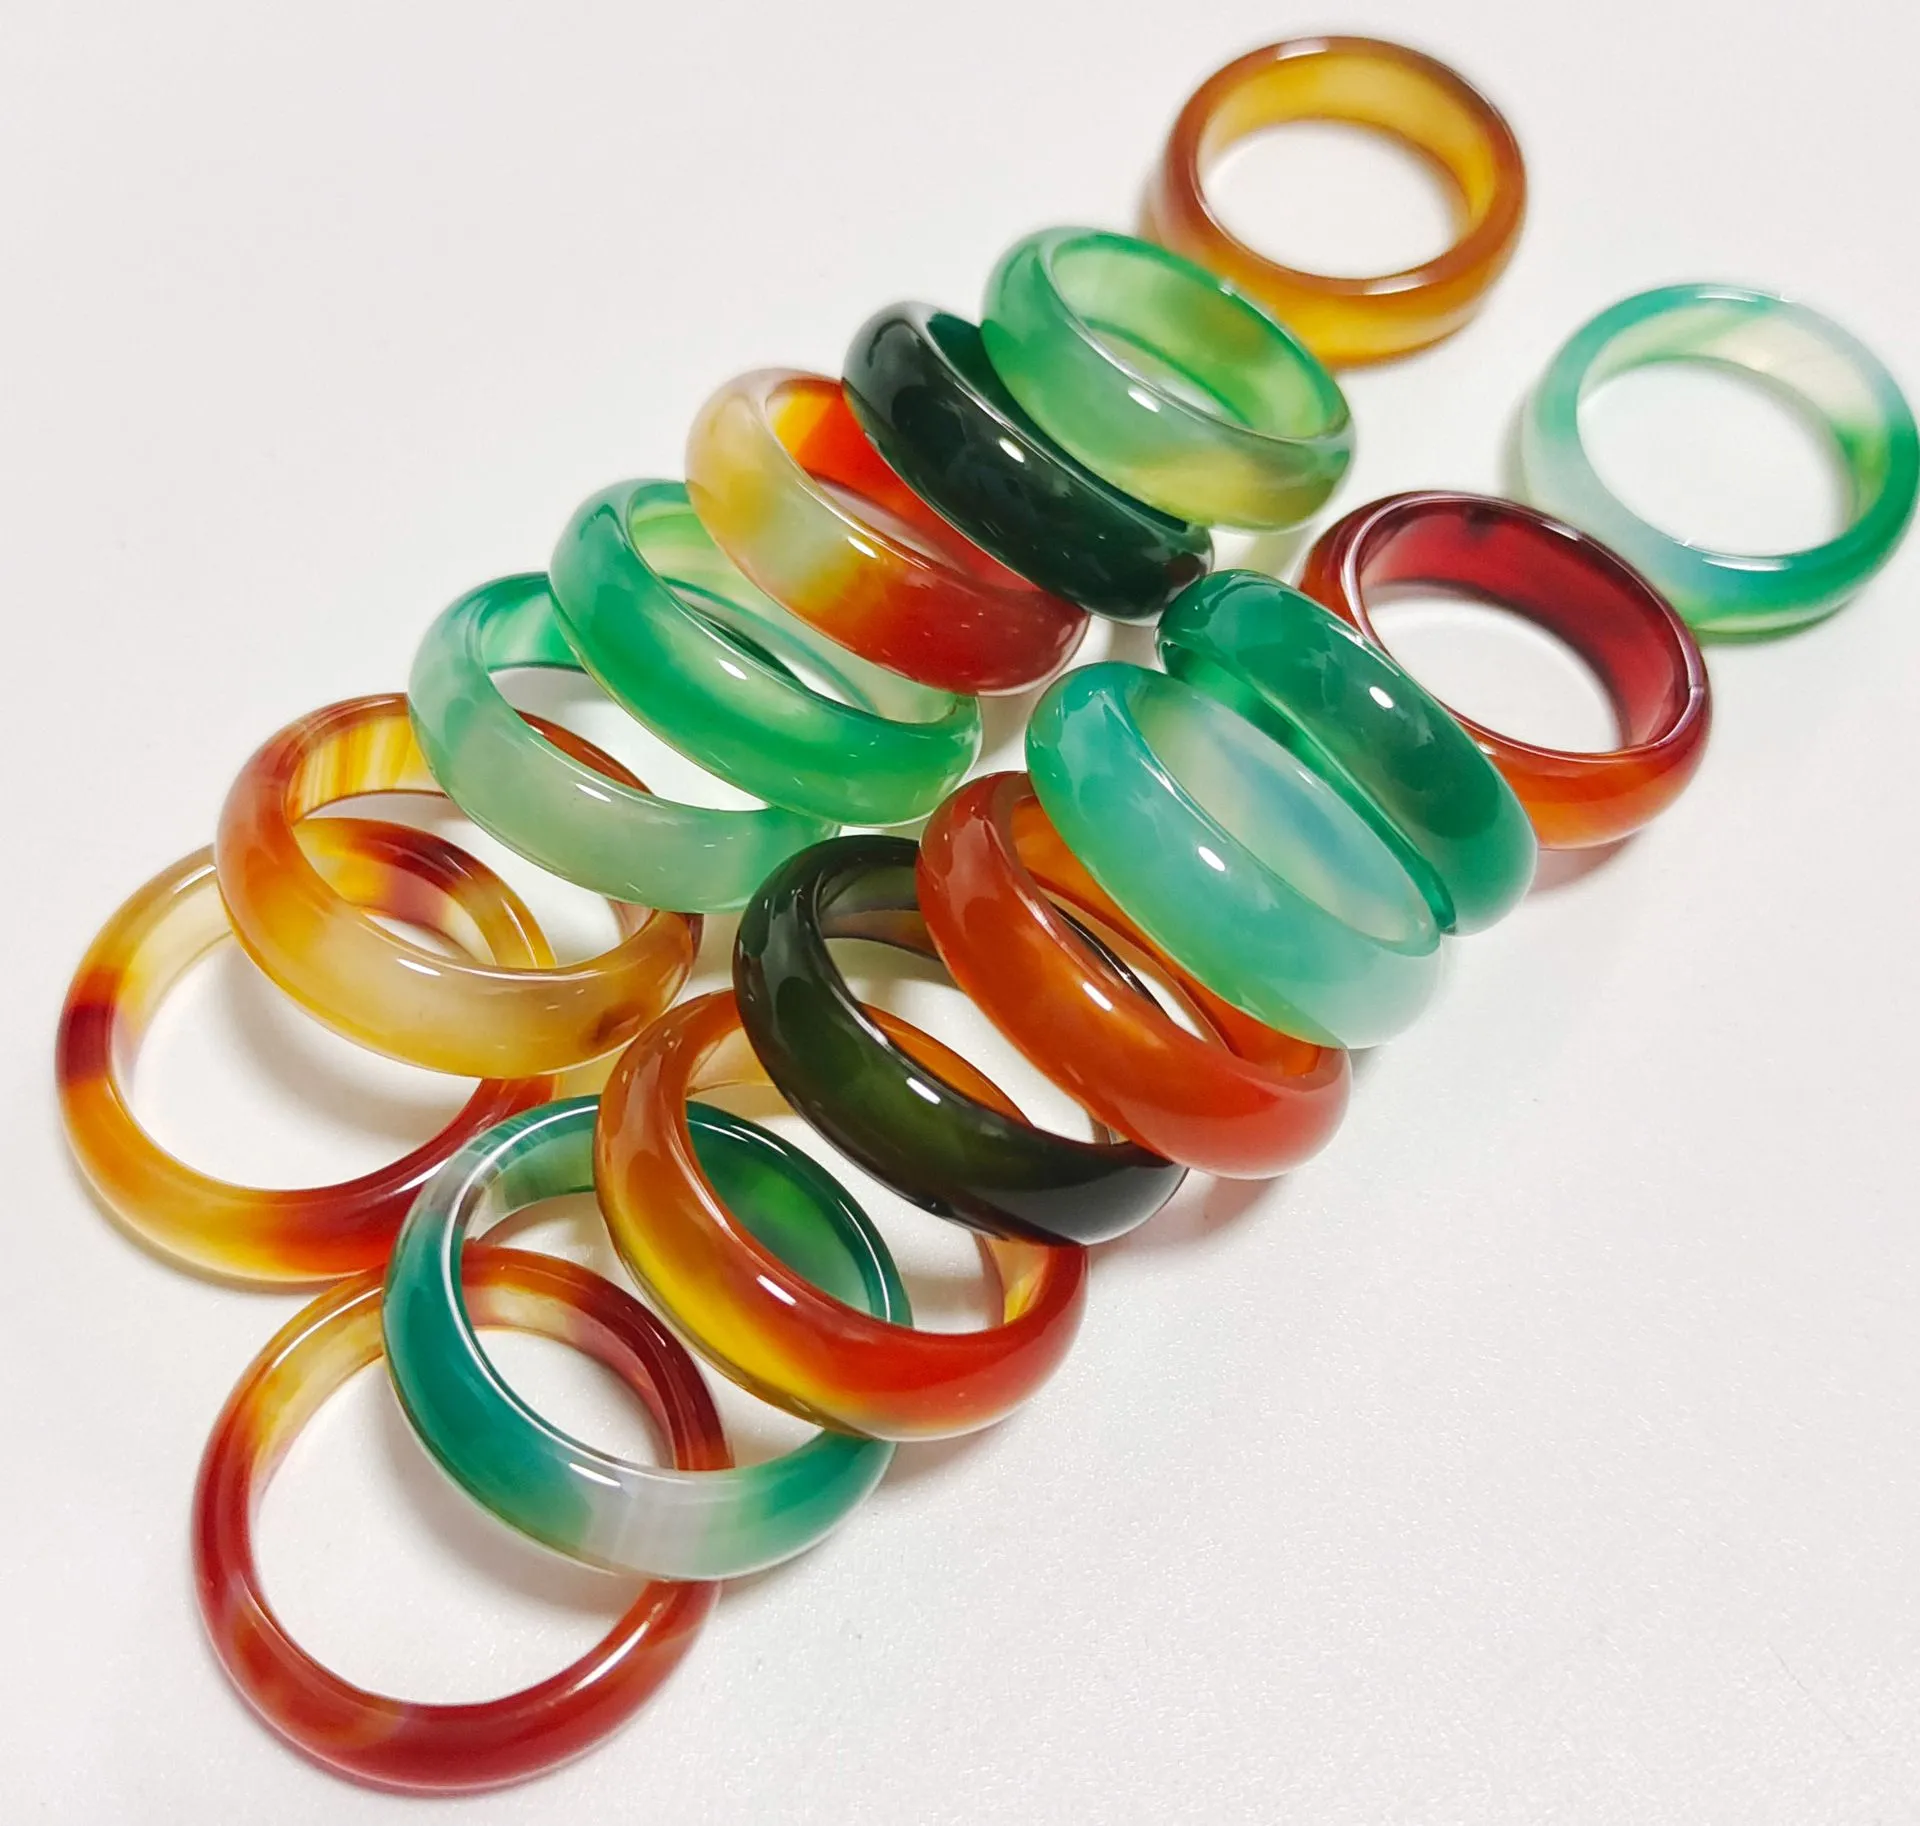 6mm Band Rings Green Yellow Glass Crystal Agate Jade Ring Jewelry Finger Rings For Women Men